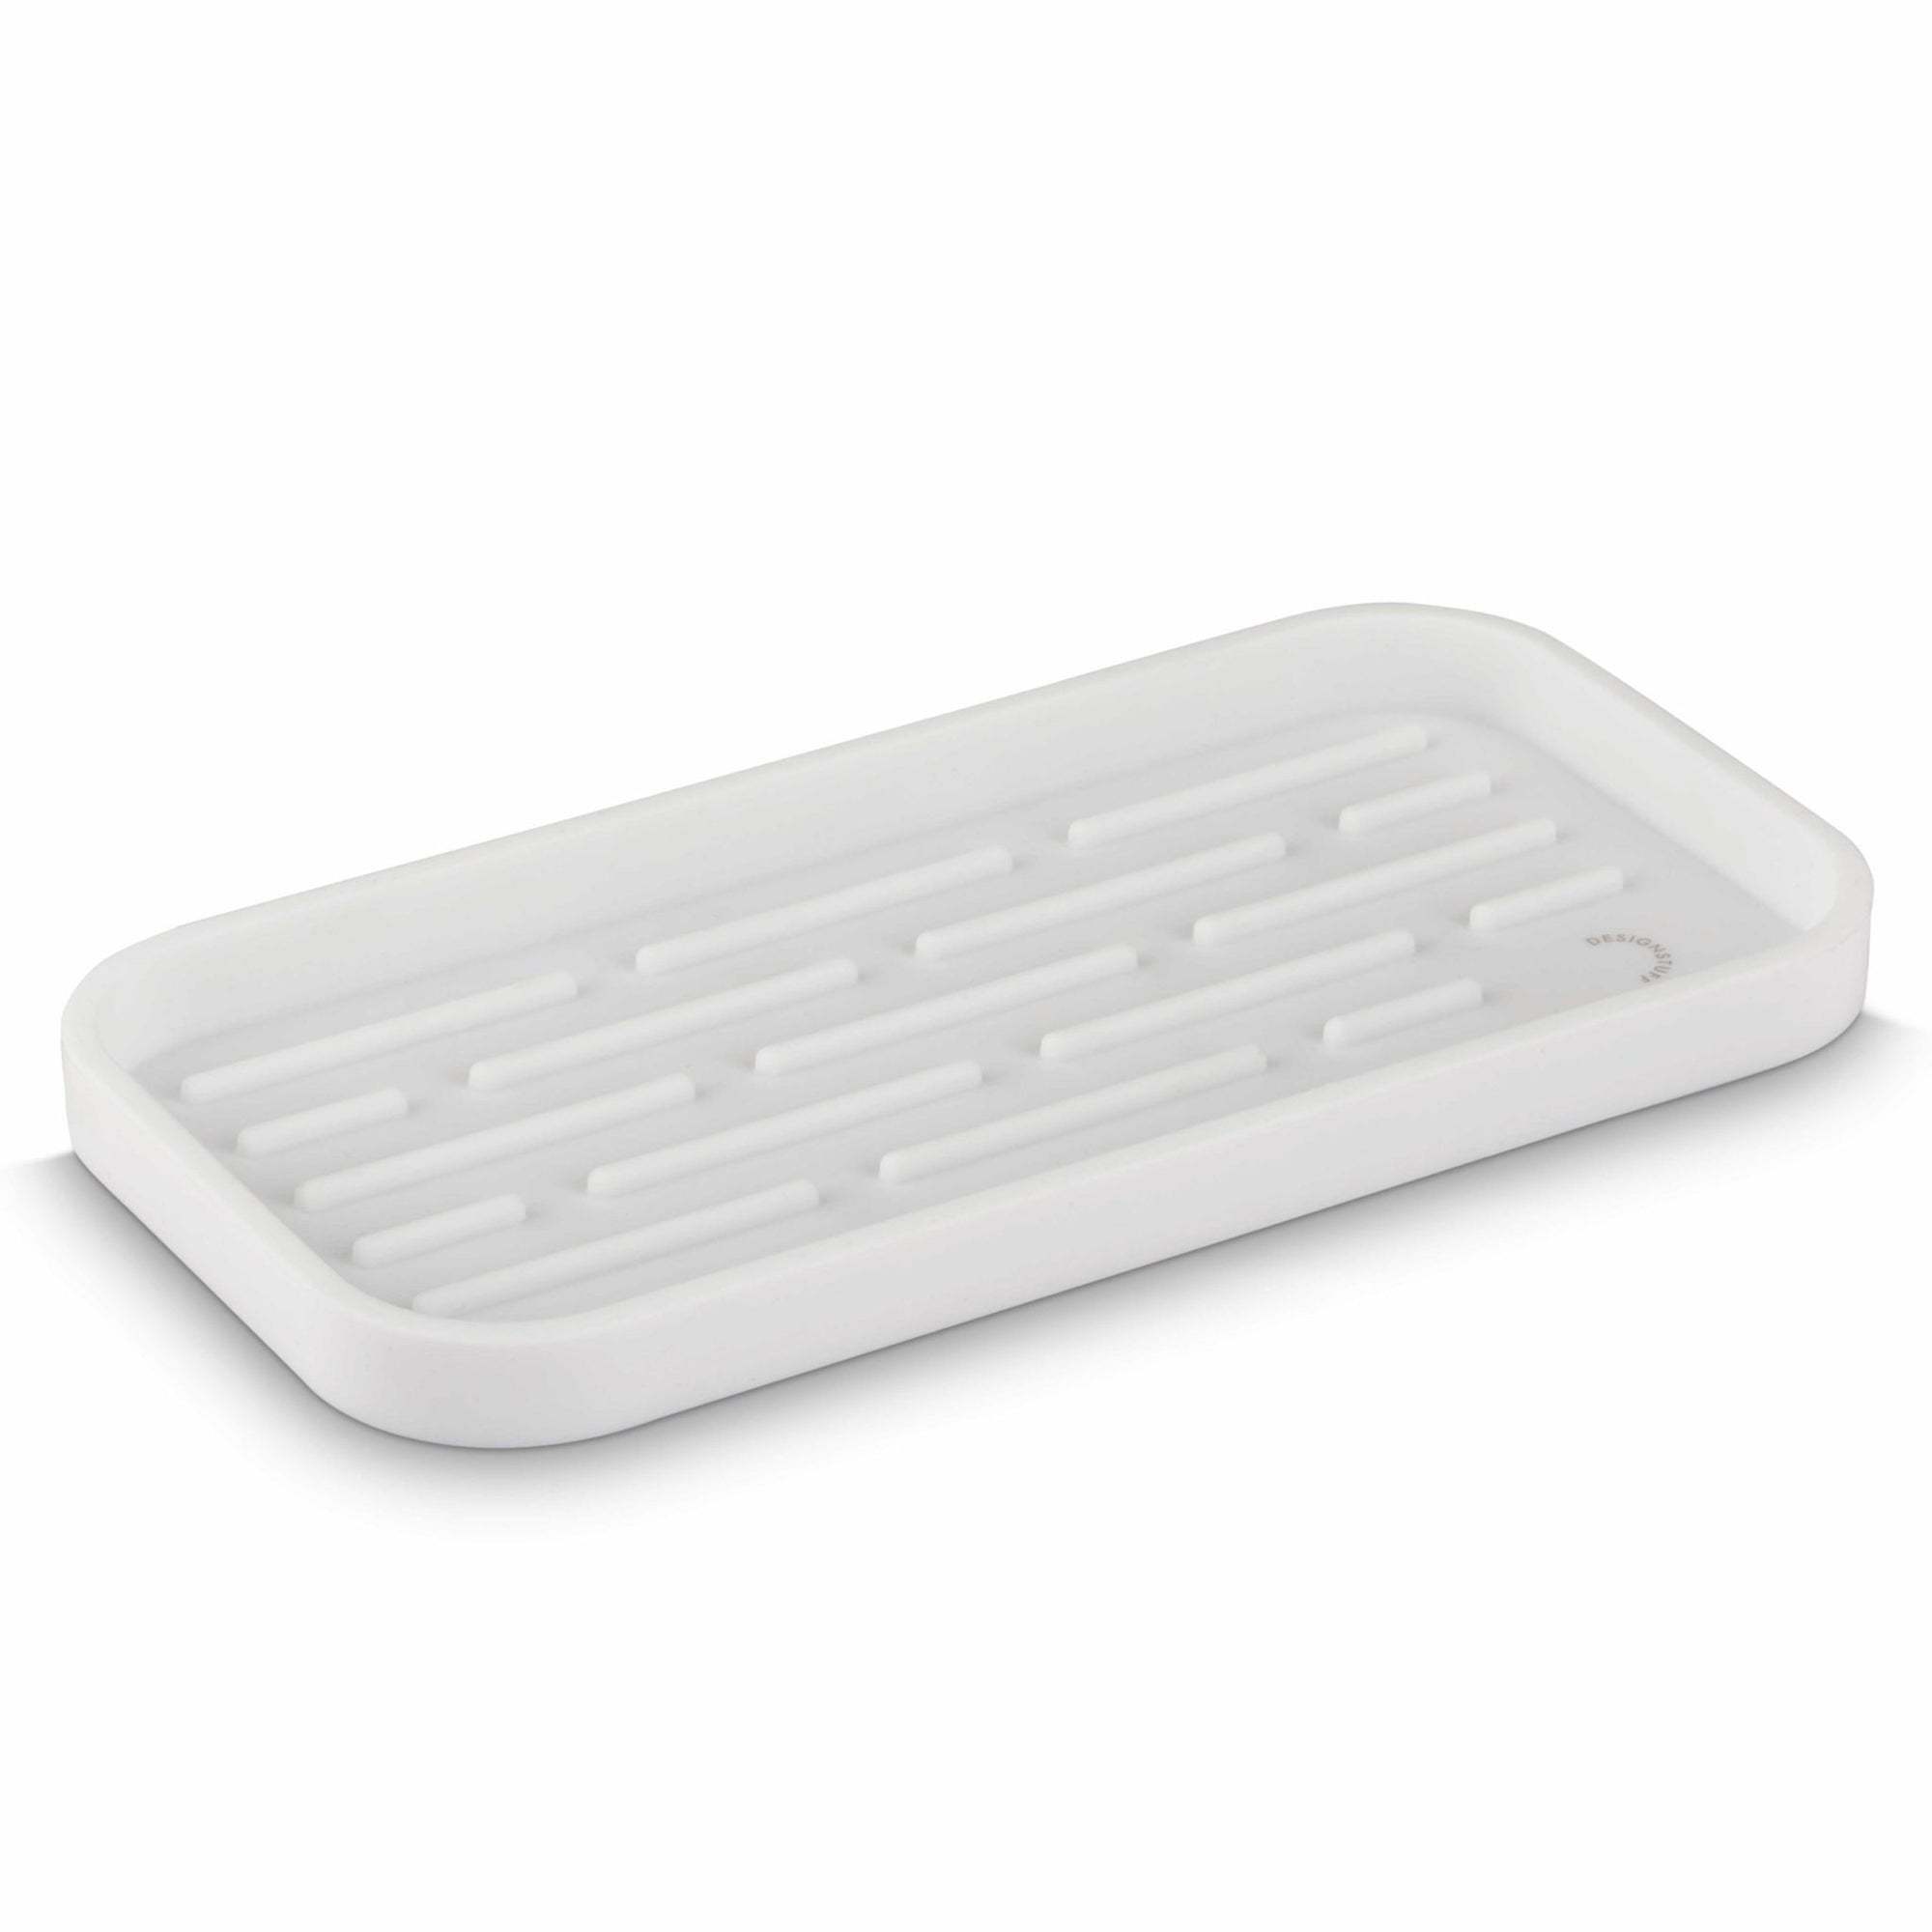 Sink Tray and Sponge Holder Silicone | White